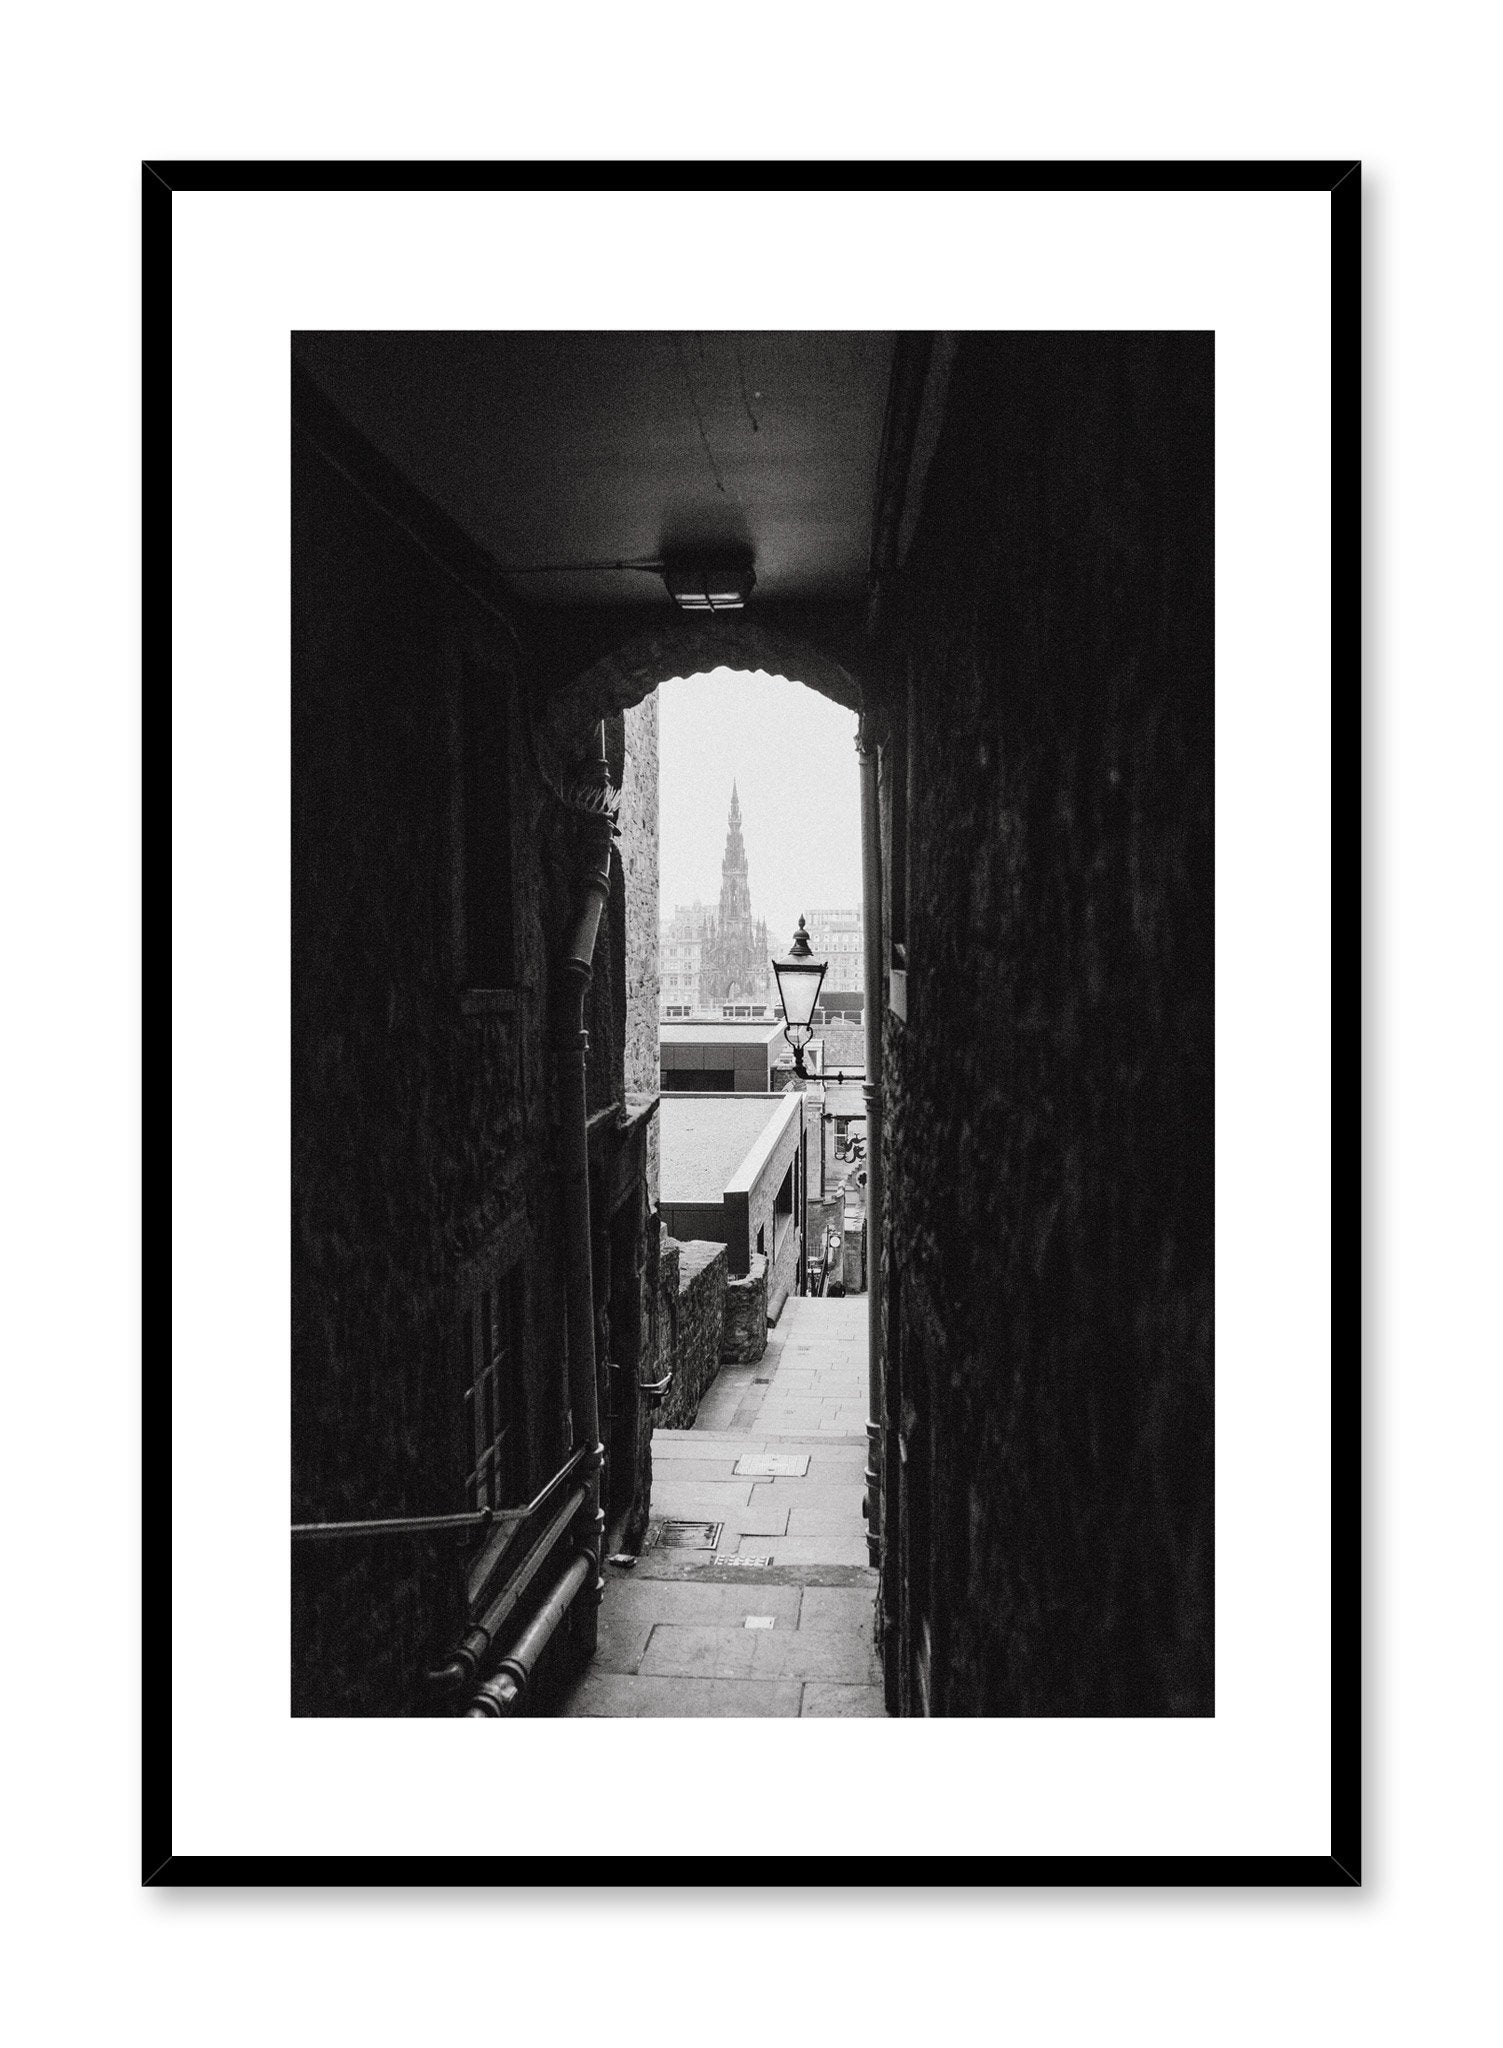 Modern minimalist poster by Opposite Wall with photography of narrow alleyway in Scotland